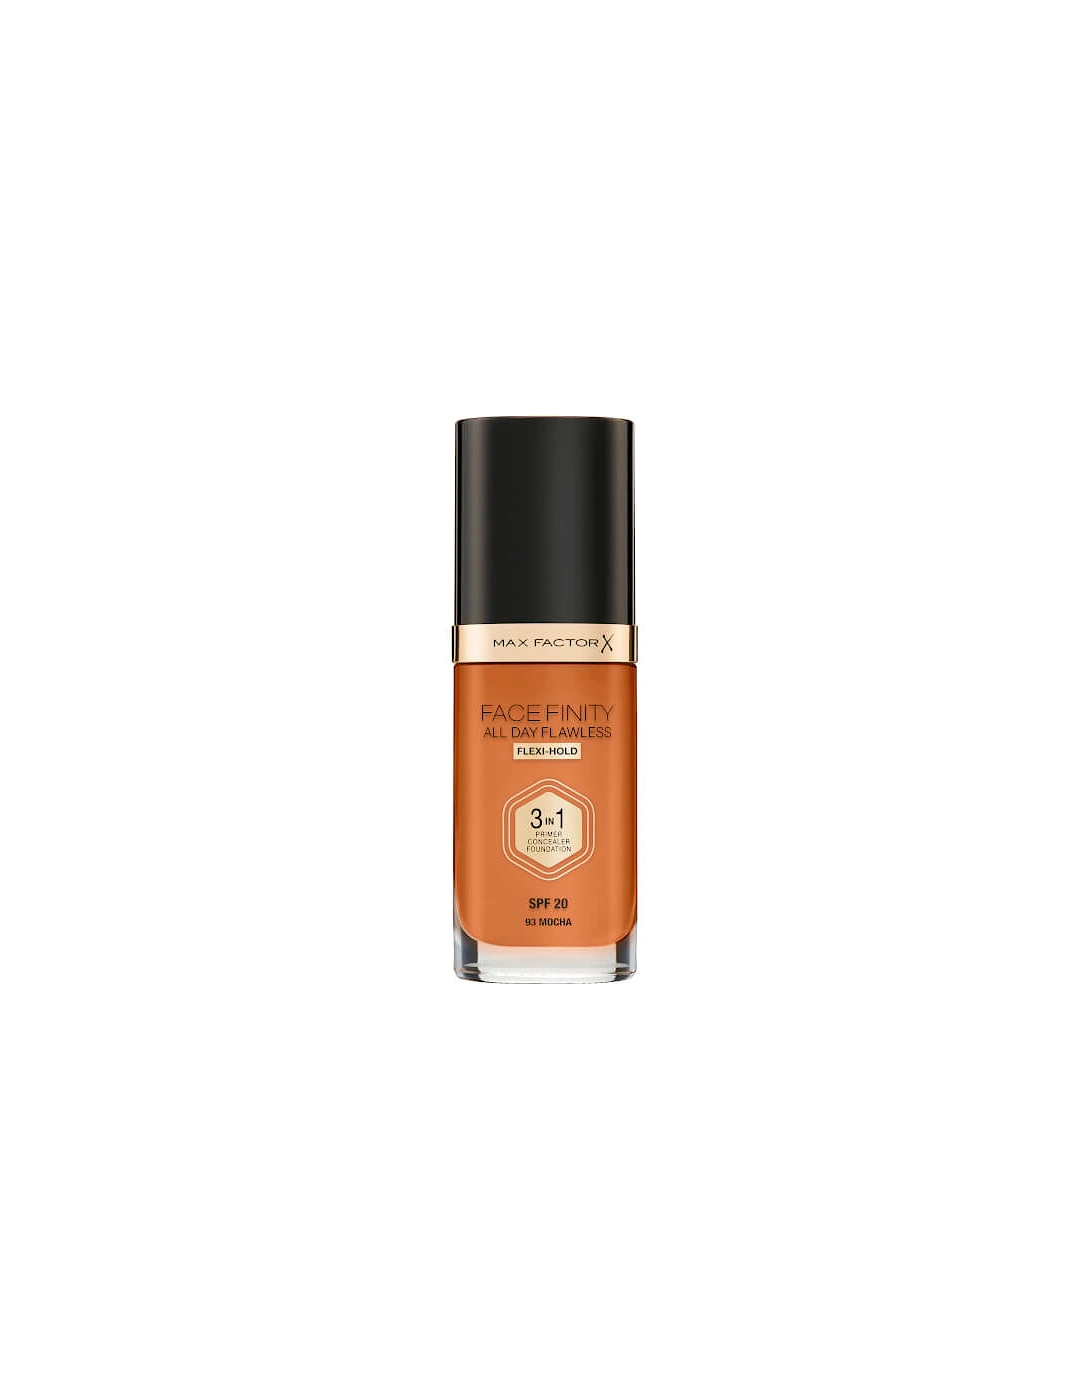 Facefinity All Day Flawless Foundation - Tawny